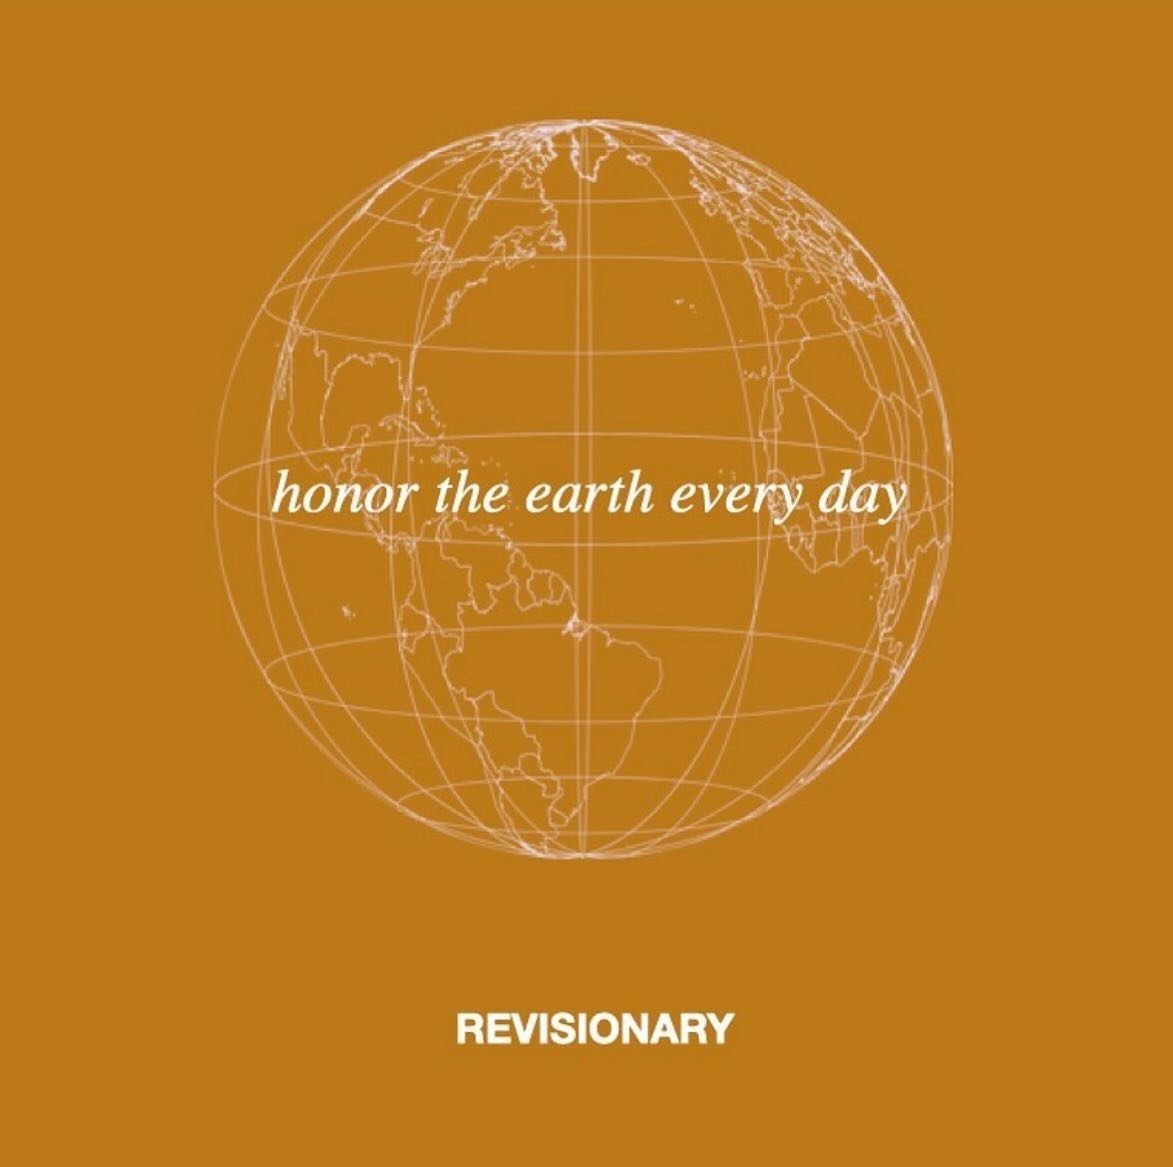 | on this last day of earth month we ask for it to last forever :: shop intentionally always + support creators of color whenever possible
.
#earthmonth #earthday #shopsustainable